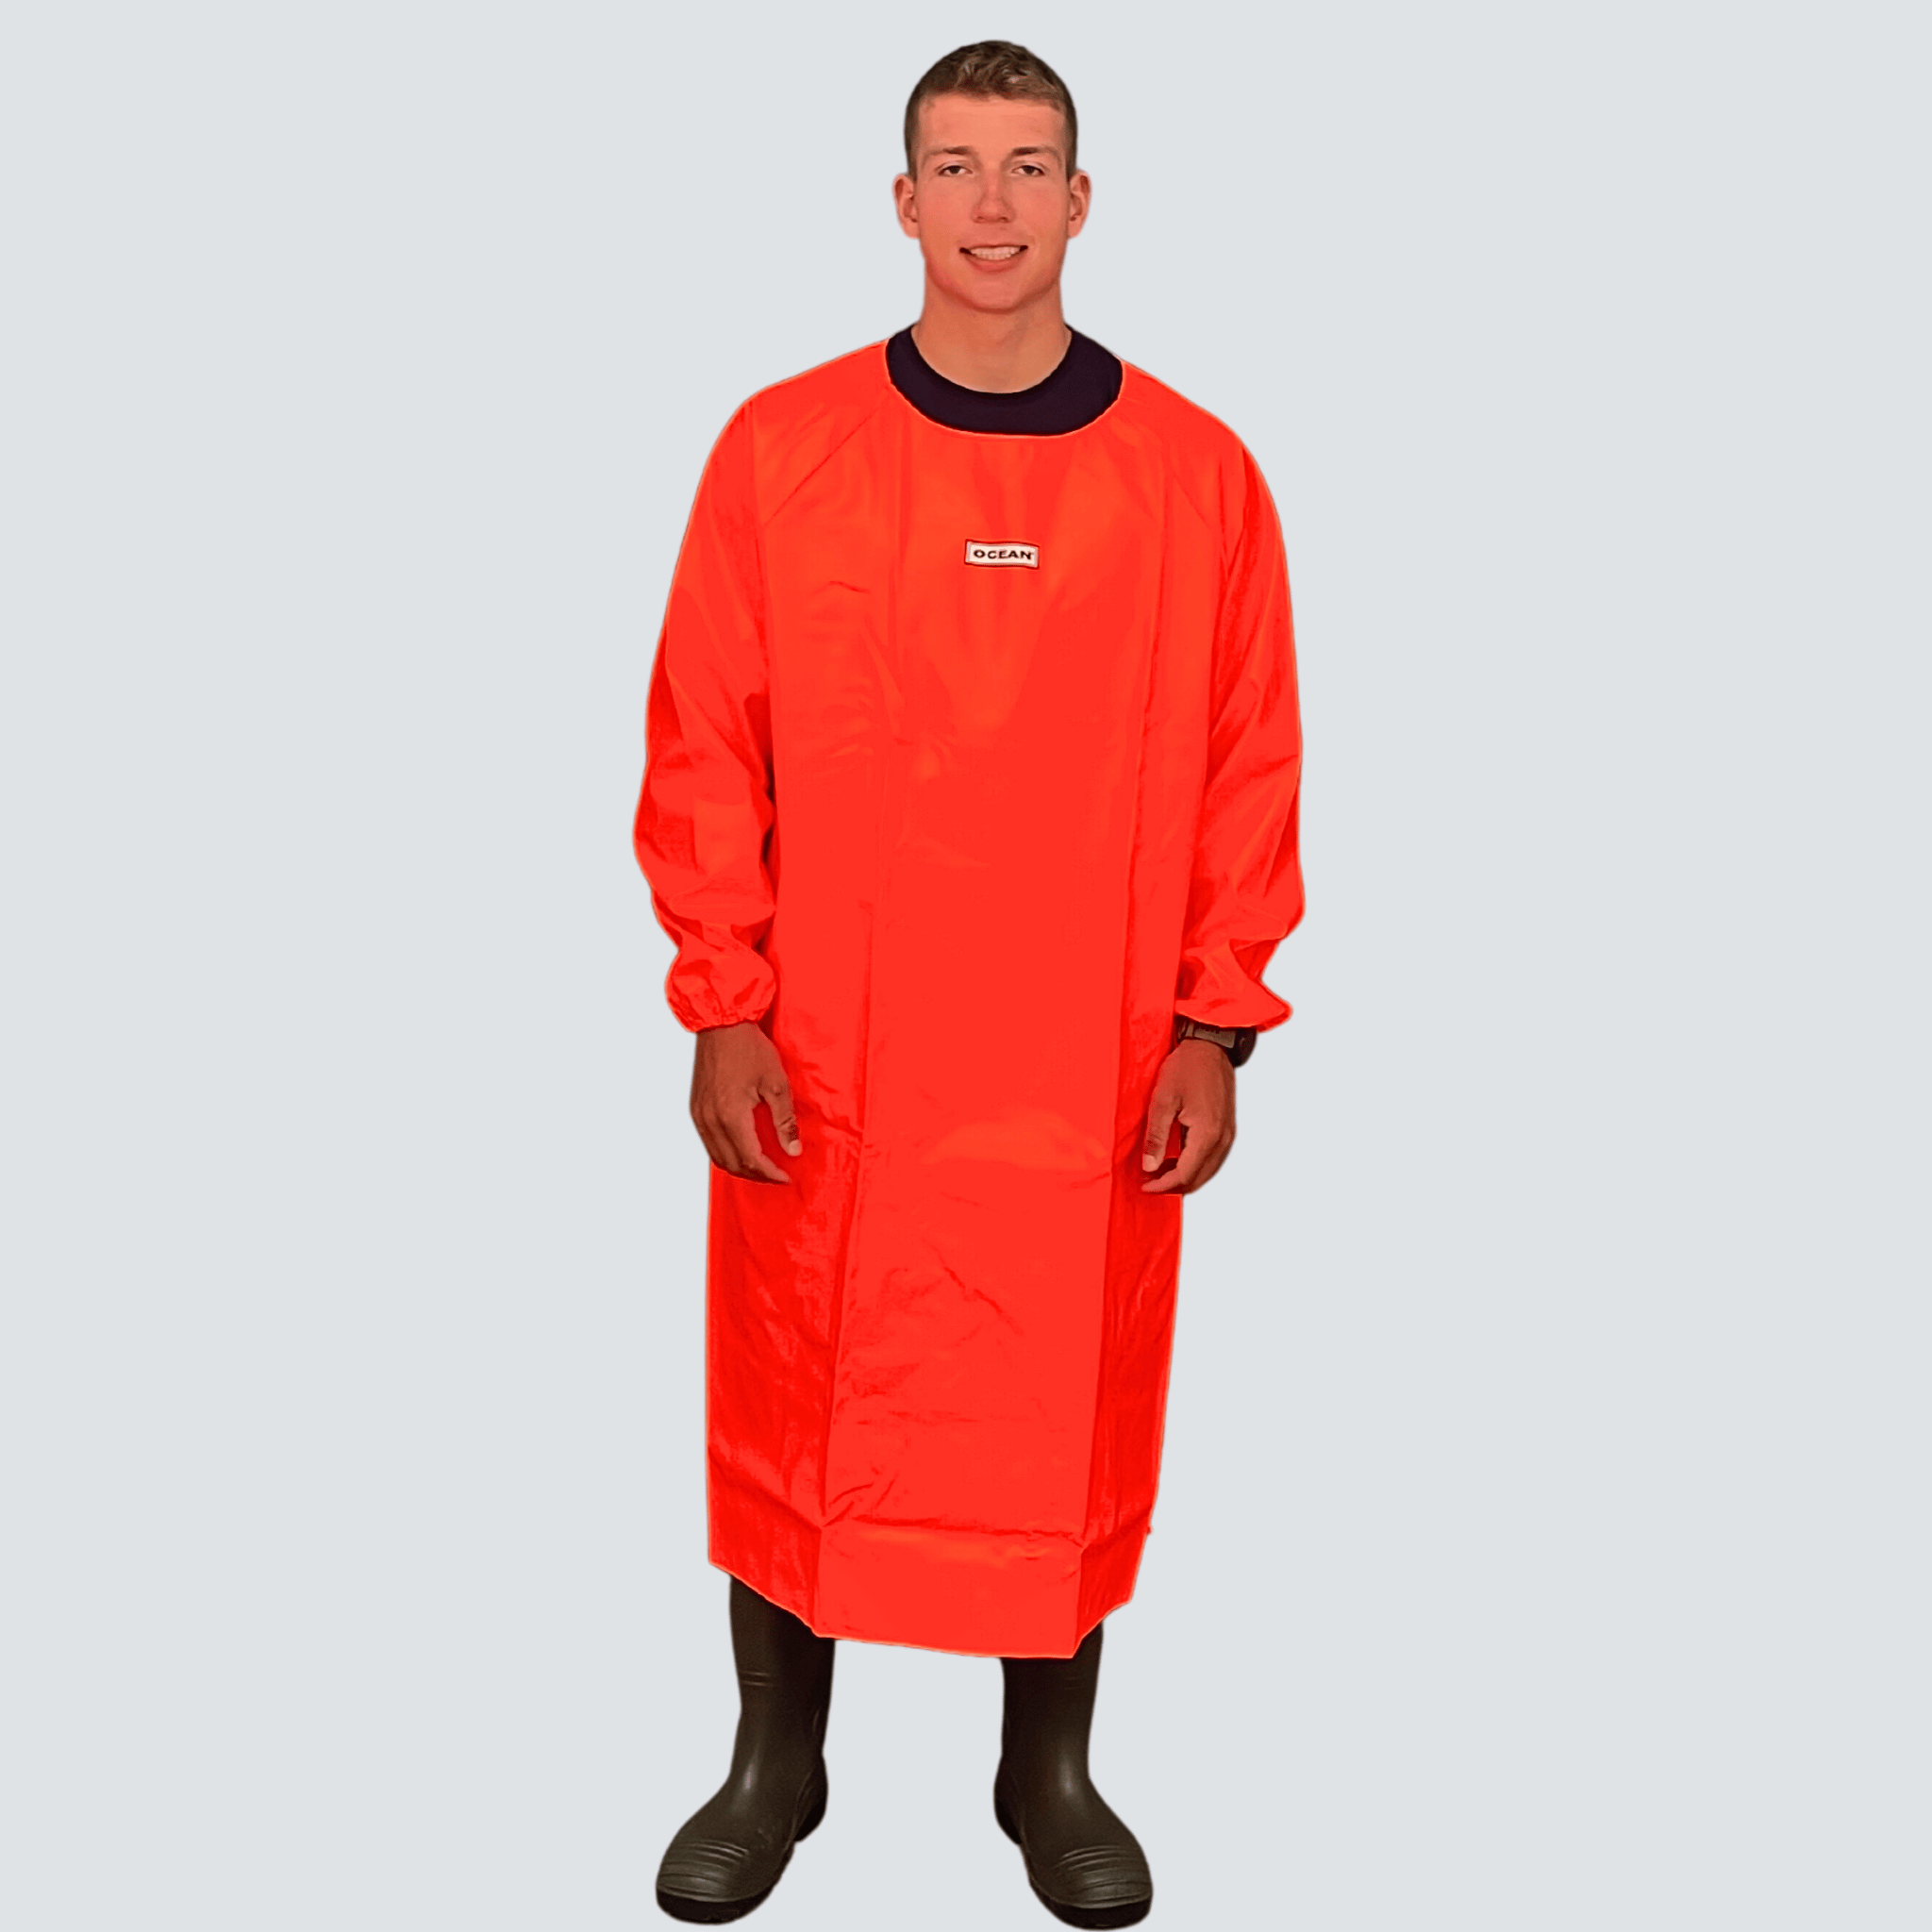 Offshore Pro Apron with Sleeves